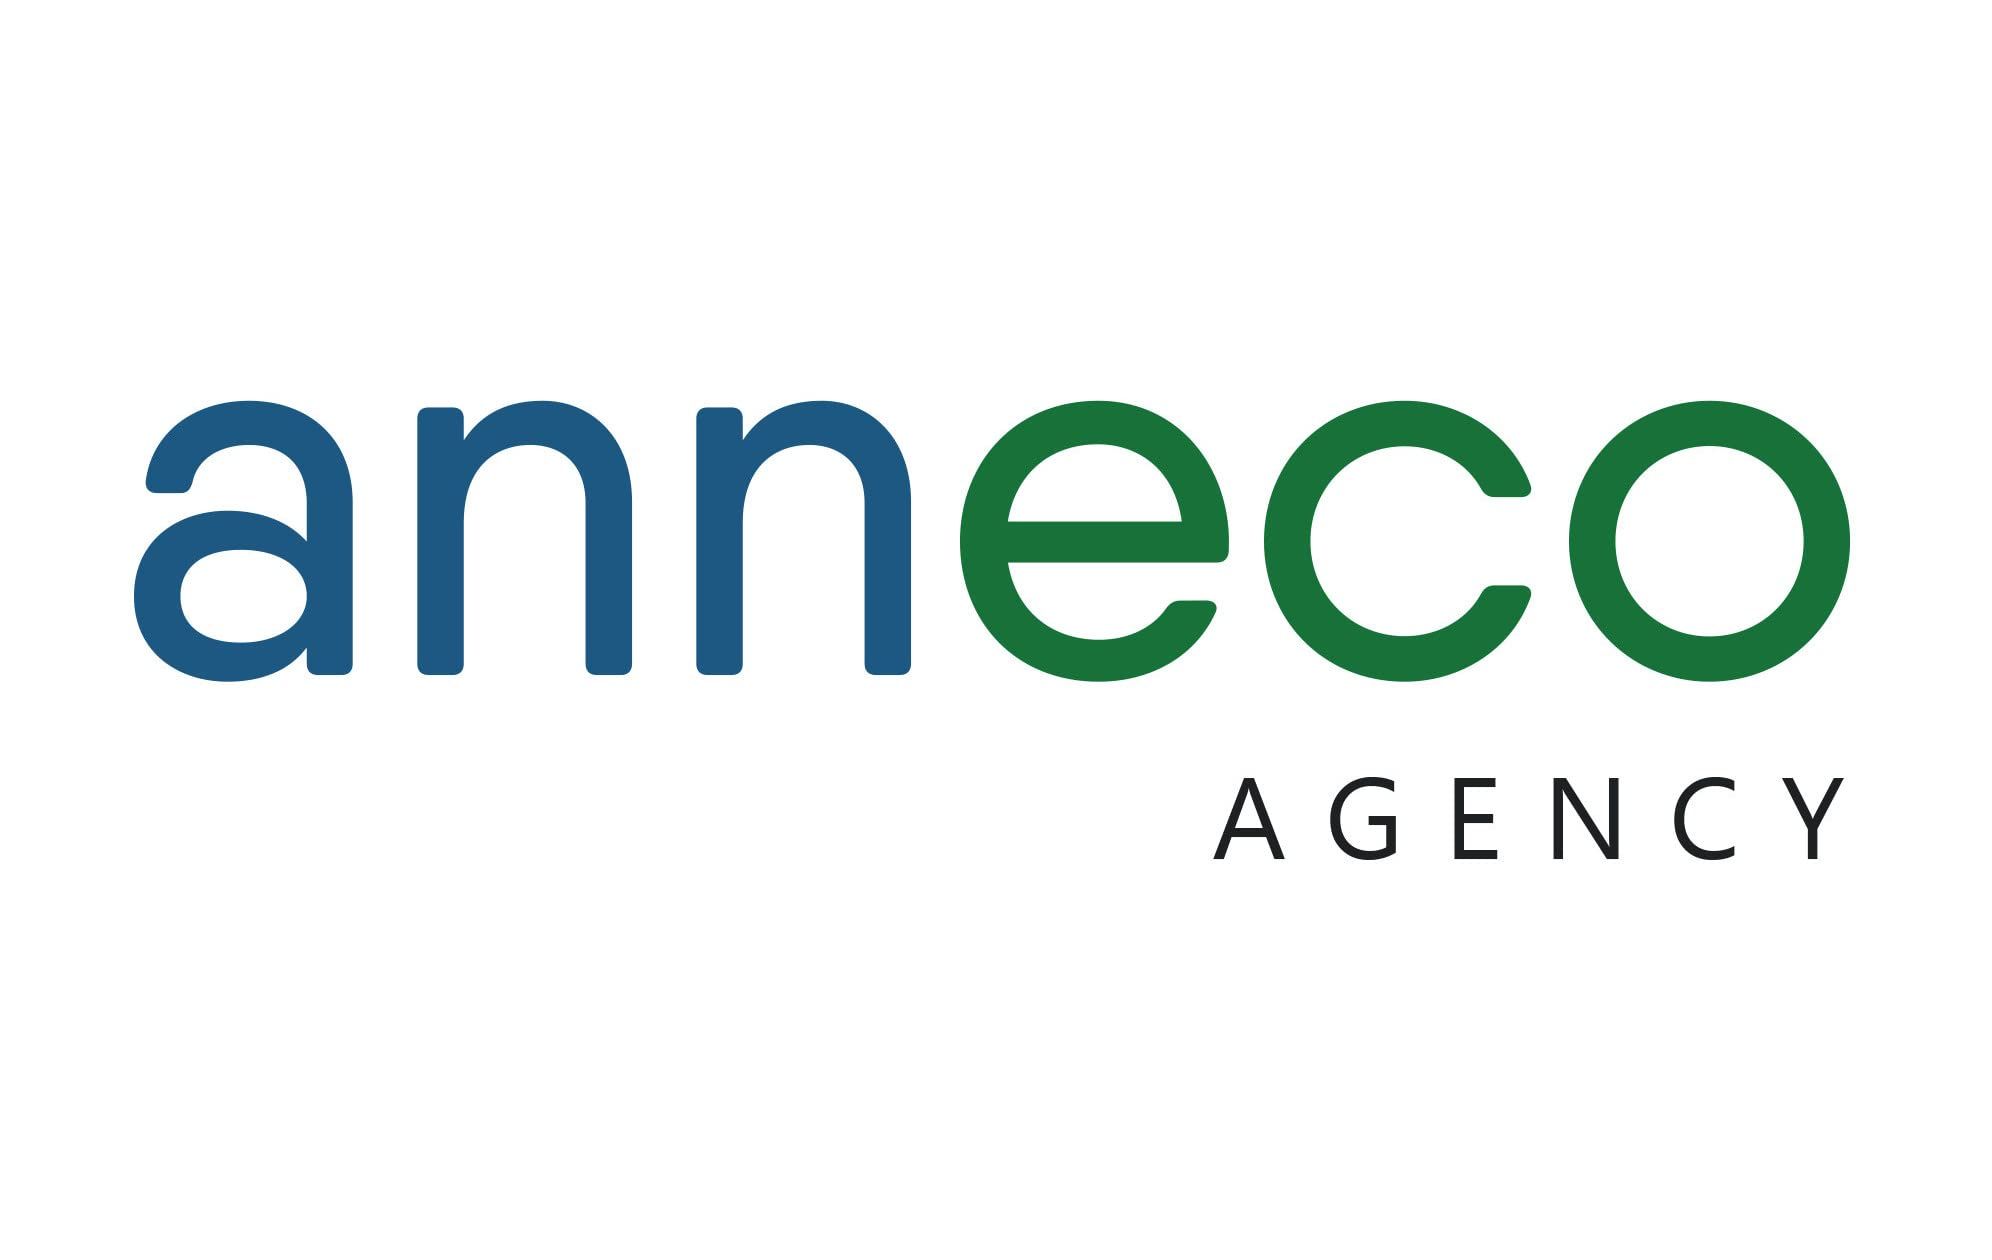 Anneco Agency